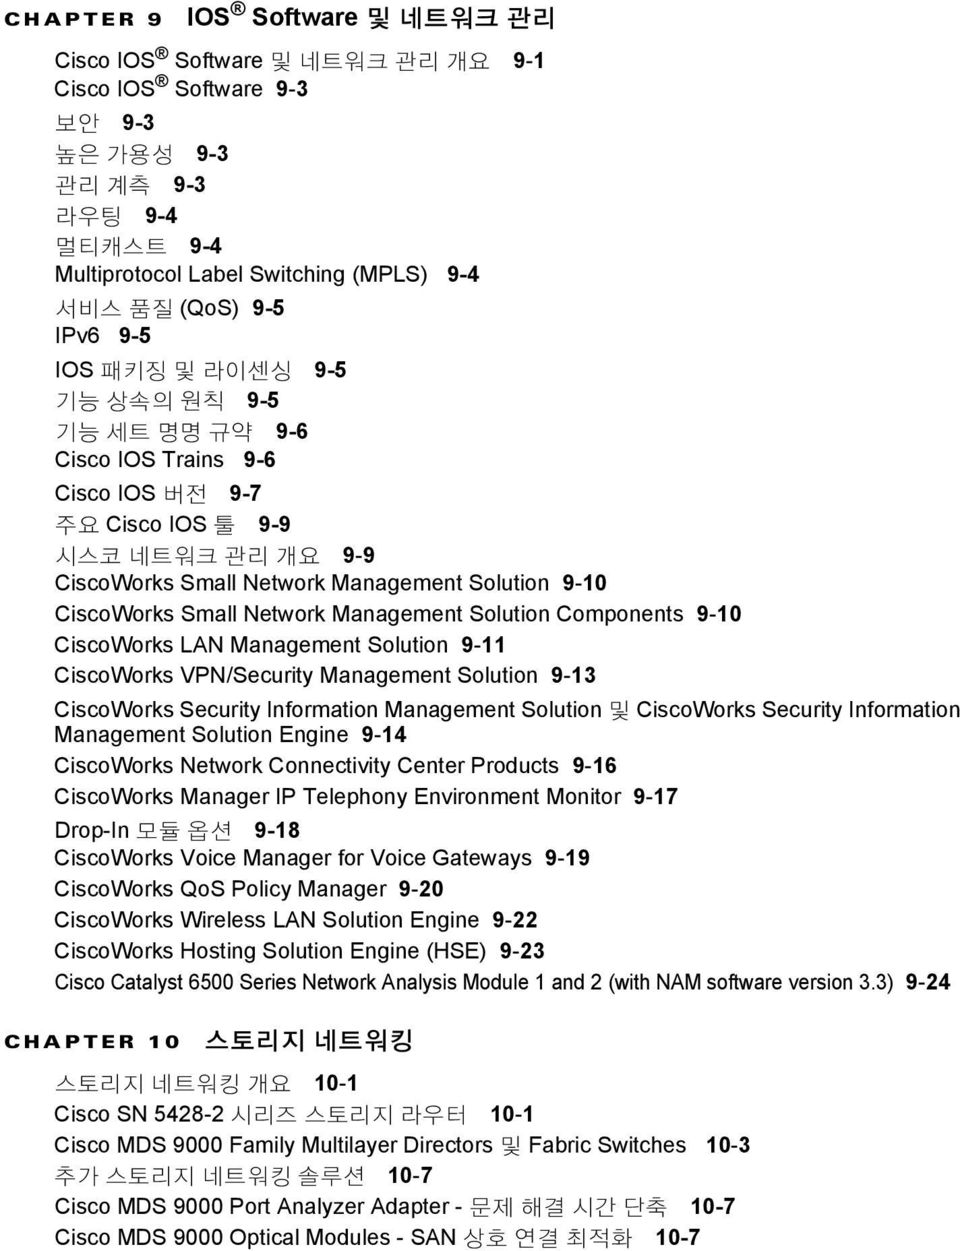 Small Network Management Solution Components 9-10 CiscoWorks LAN Management Solution 9-11 CiscoWorks VPN/Security Management Solution 9-13 CiscoWorks Security Information Management Solution 및